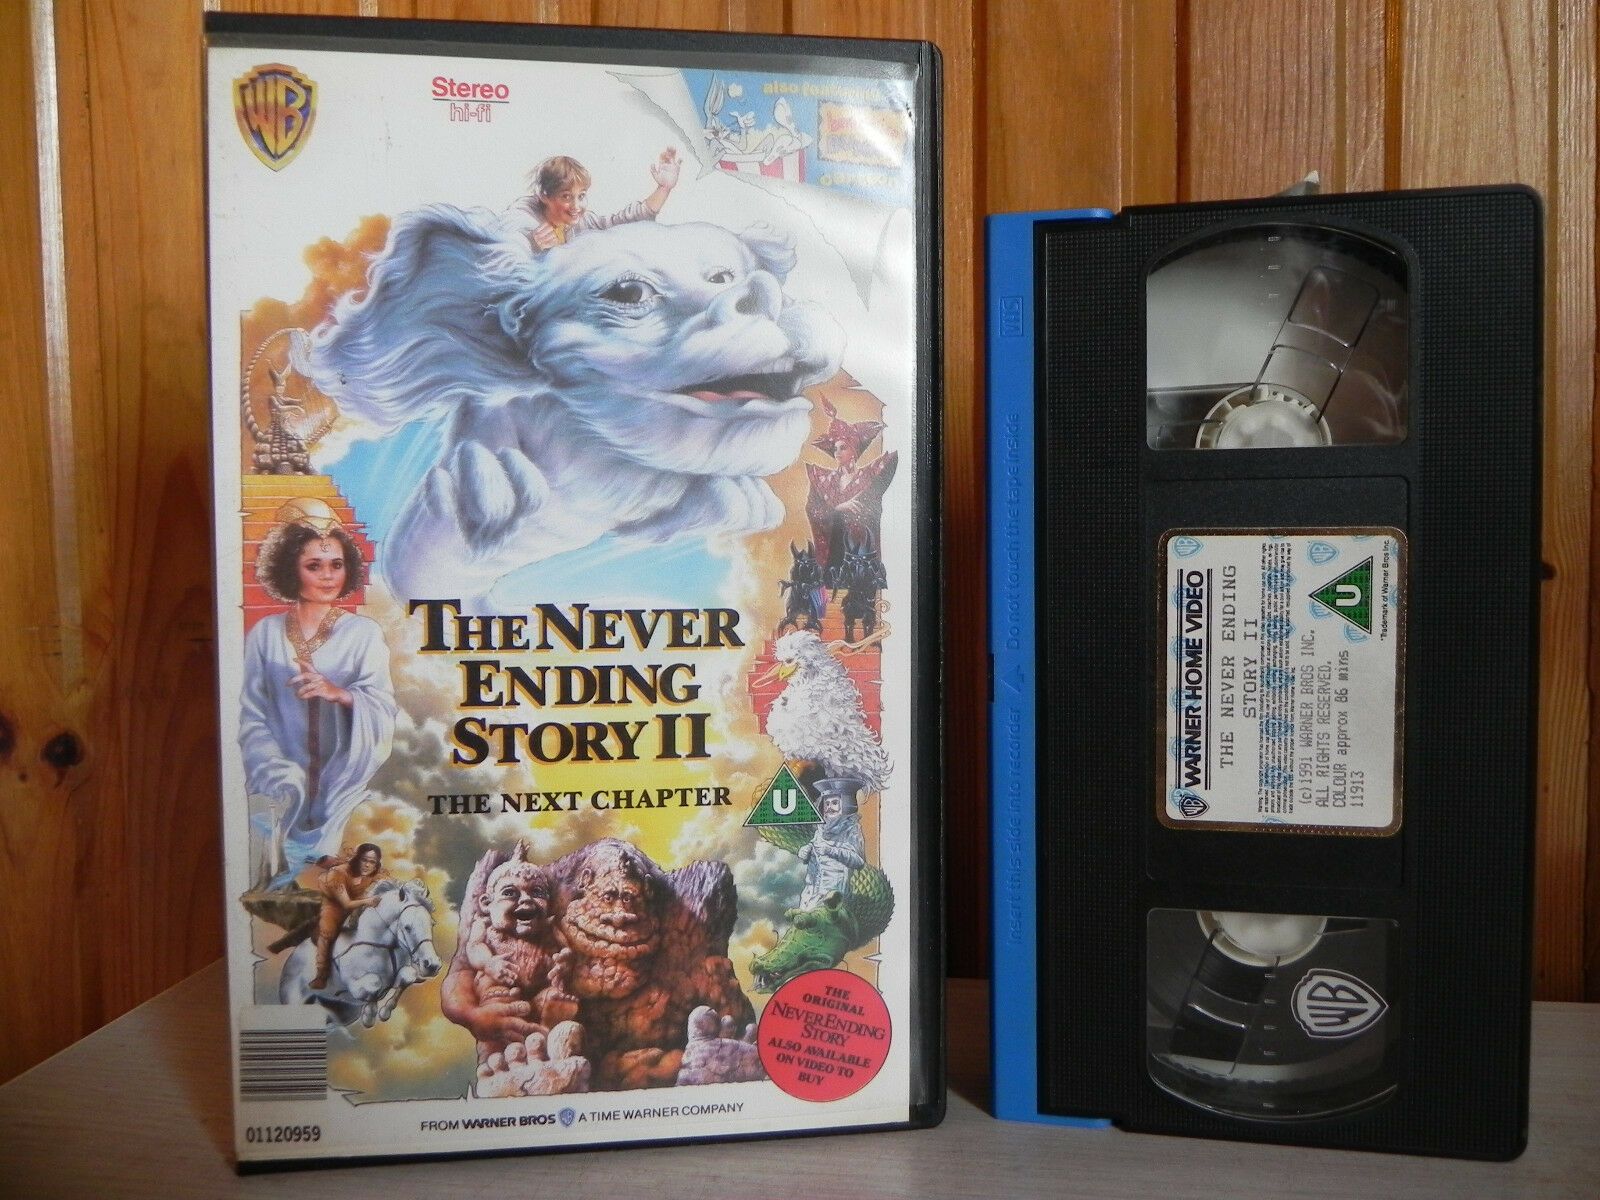 The Never Ending Story 2: The Next Chapter (1994) - Large Box - Fantasy - VHS-